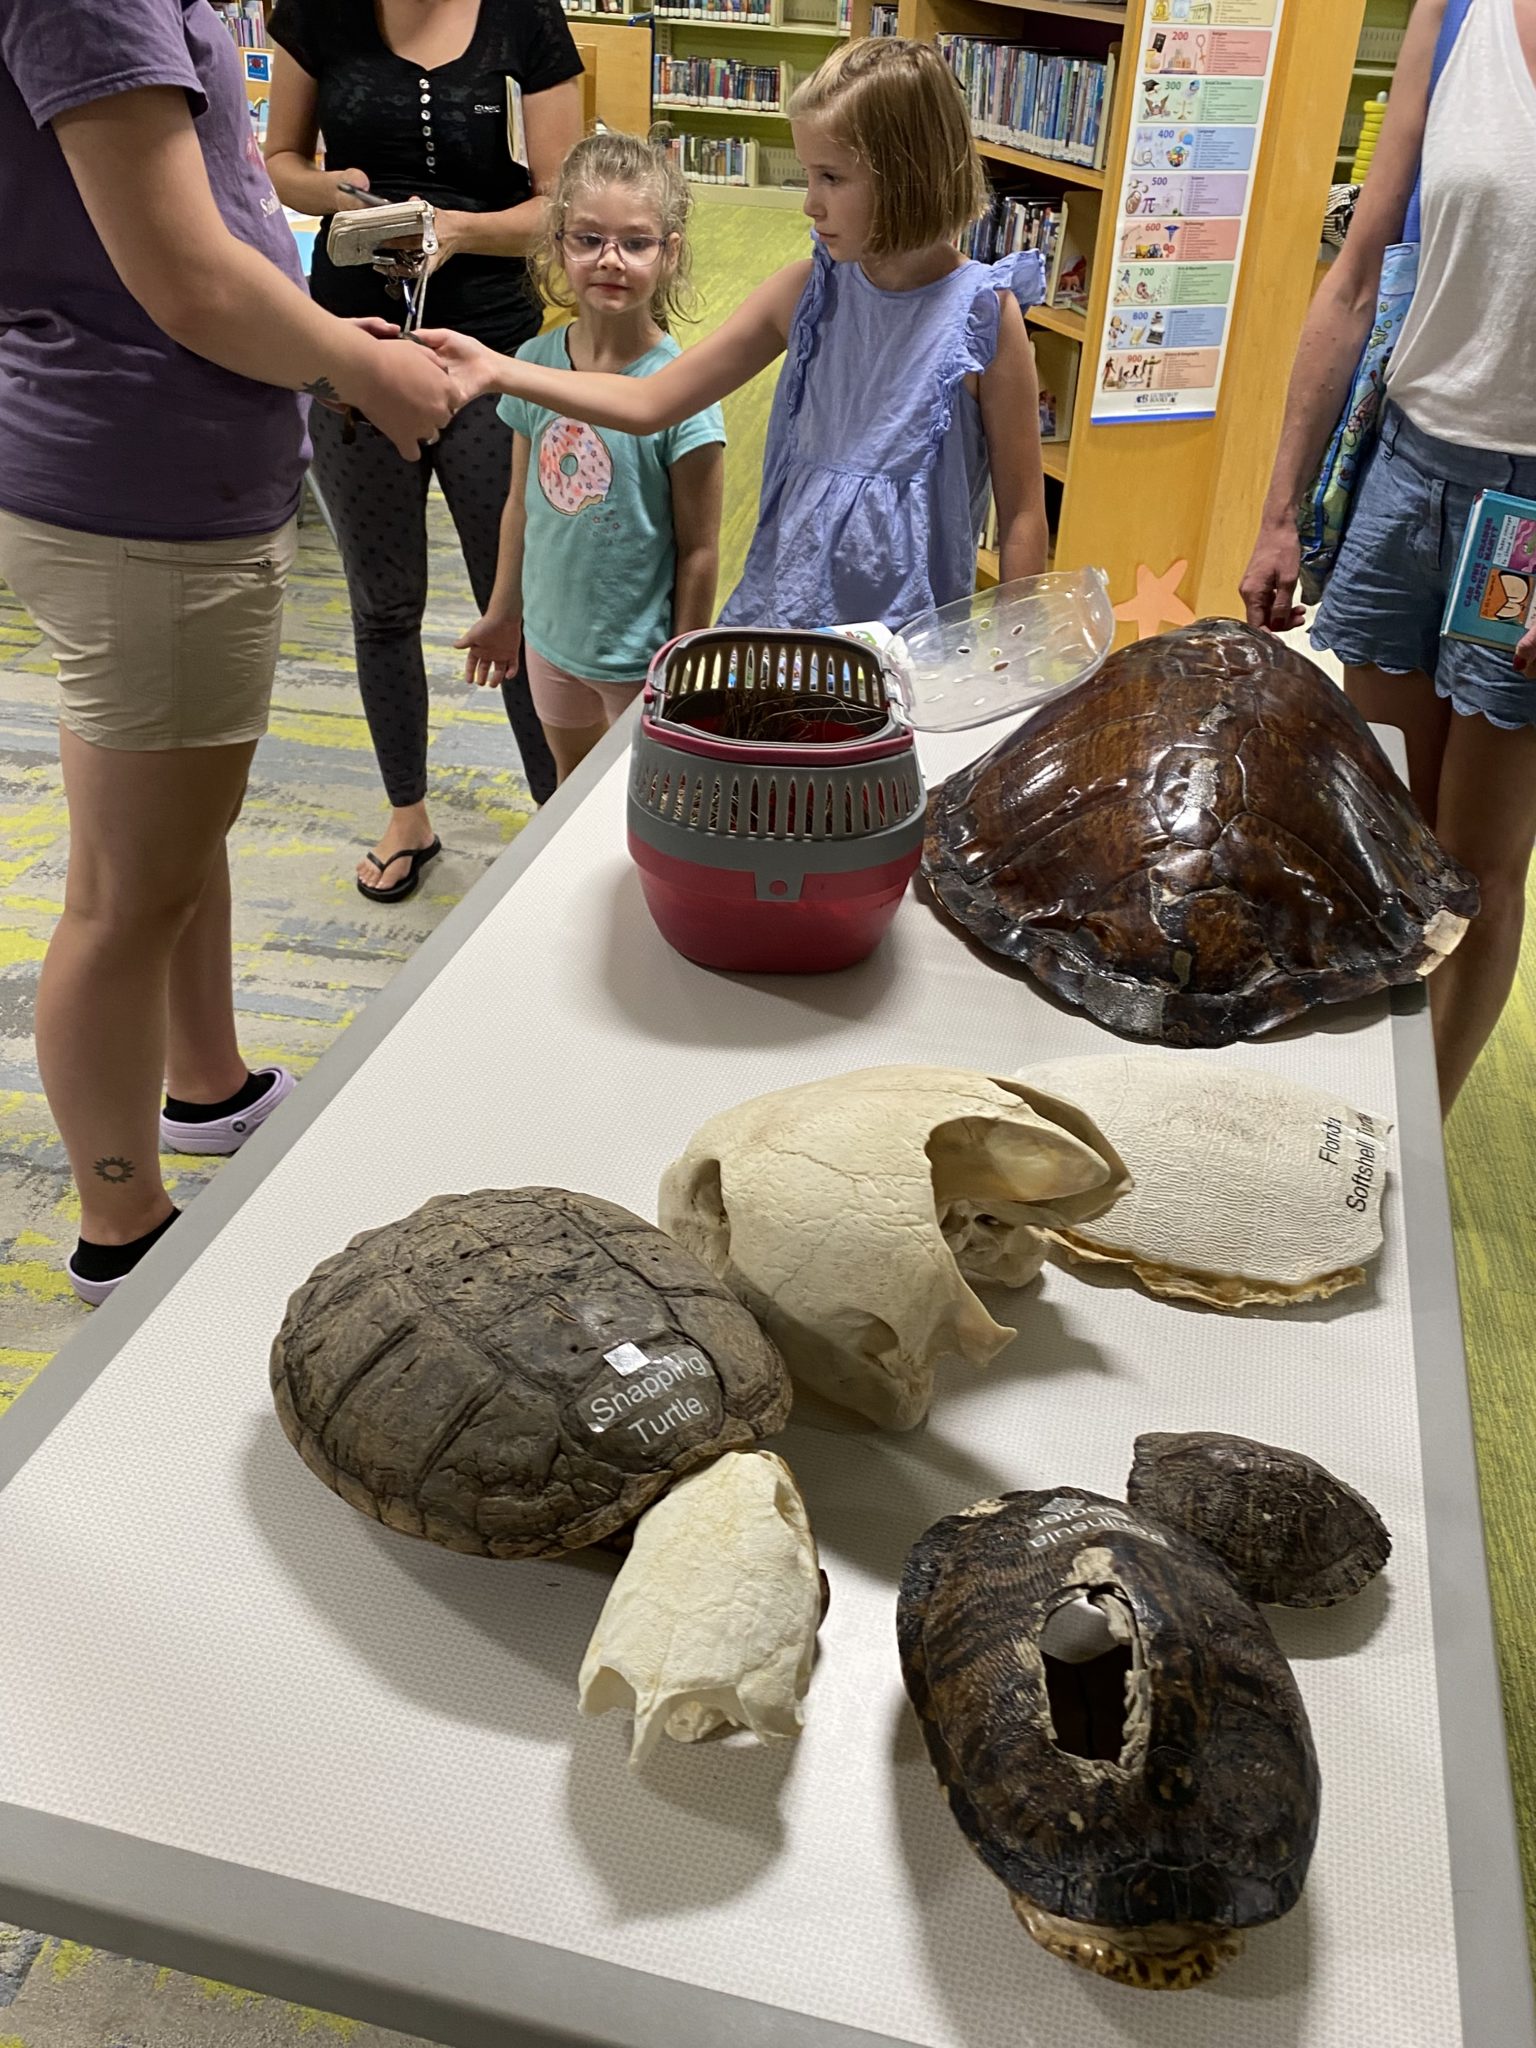 Learning about turtles with C.R.O.W. staff